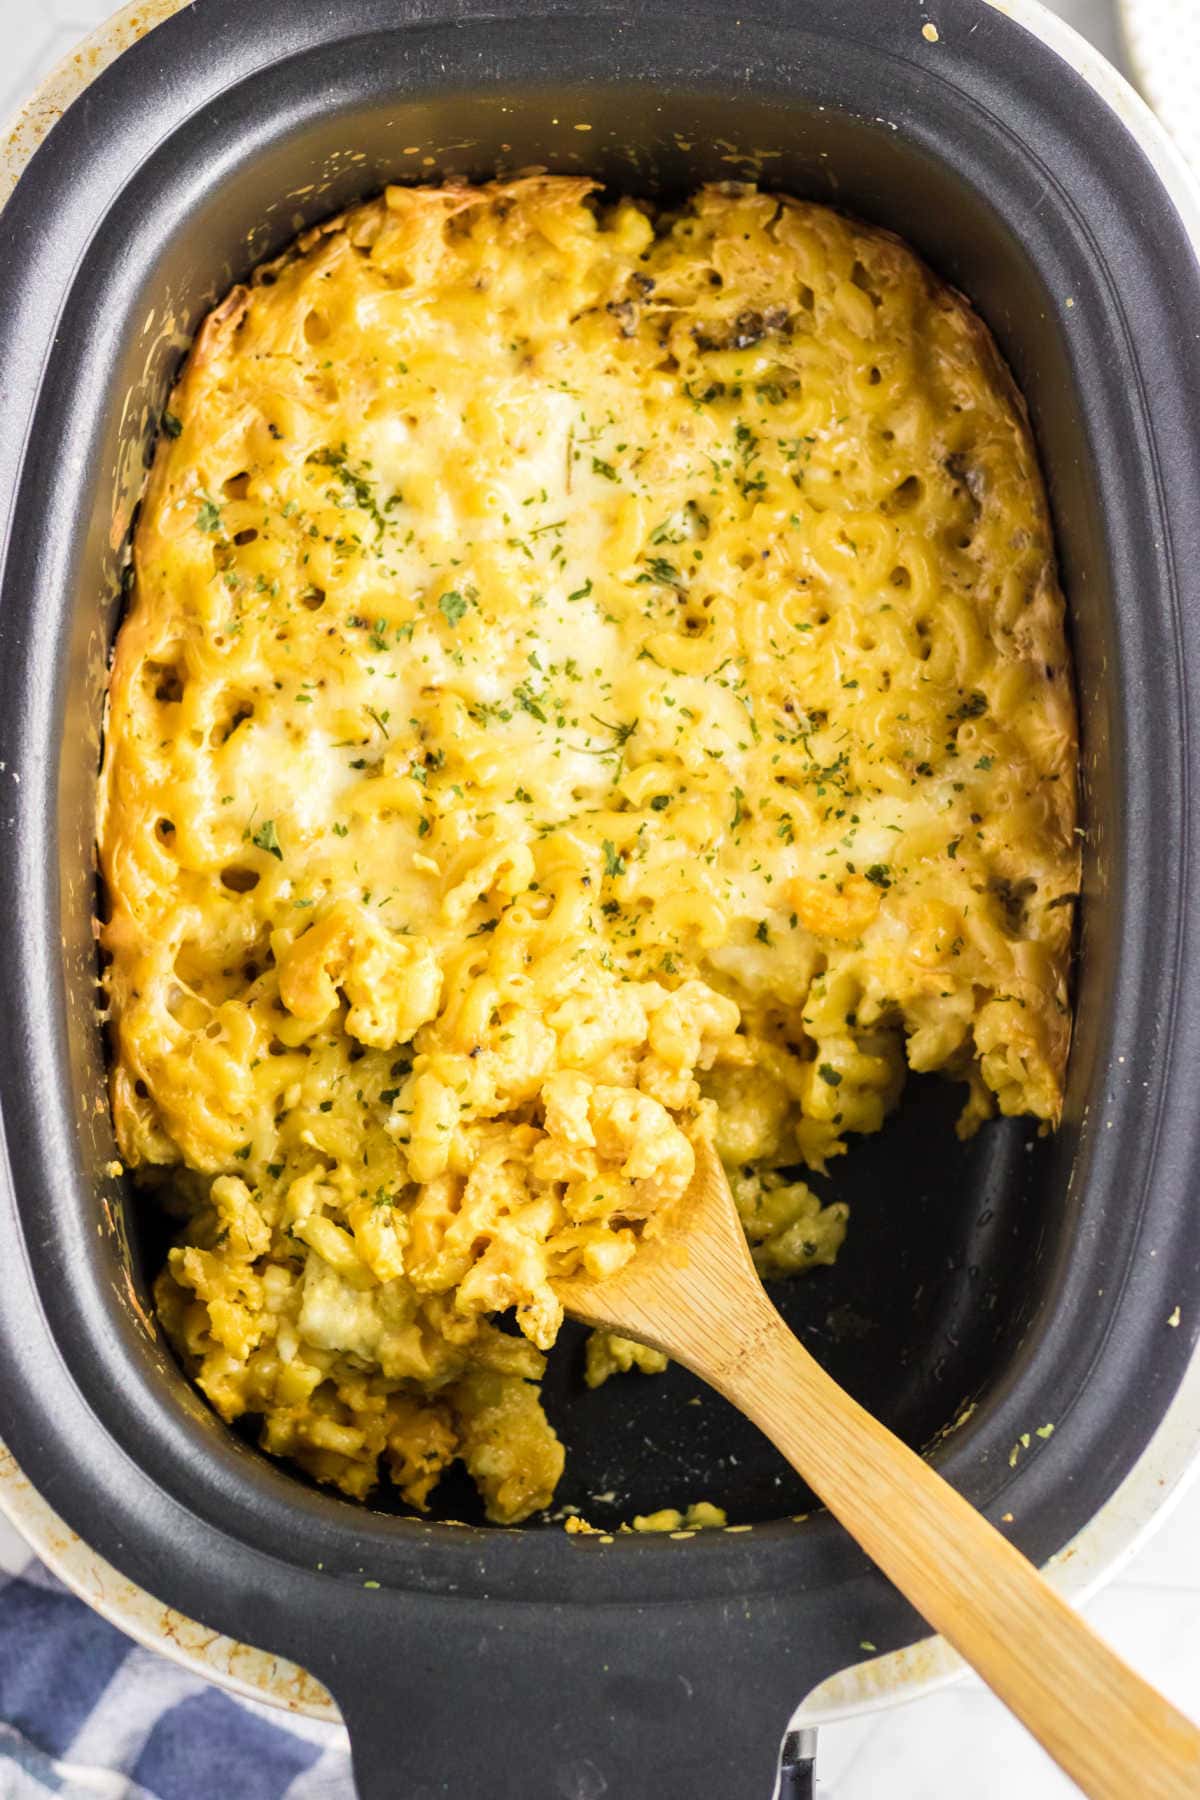 Macaroni and cheese in the crockpot with a wooden spoon.